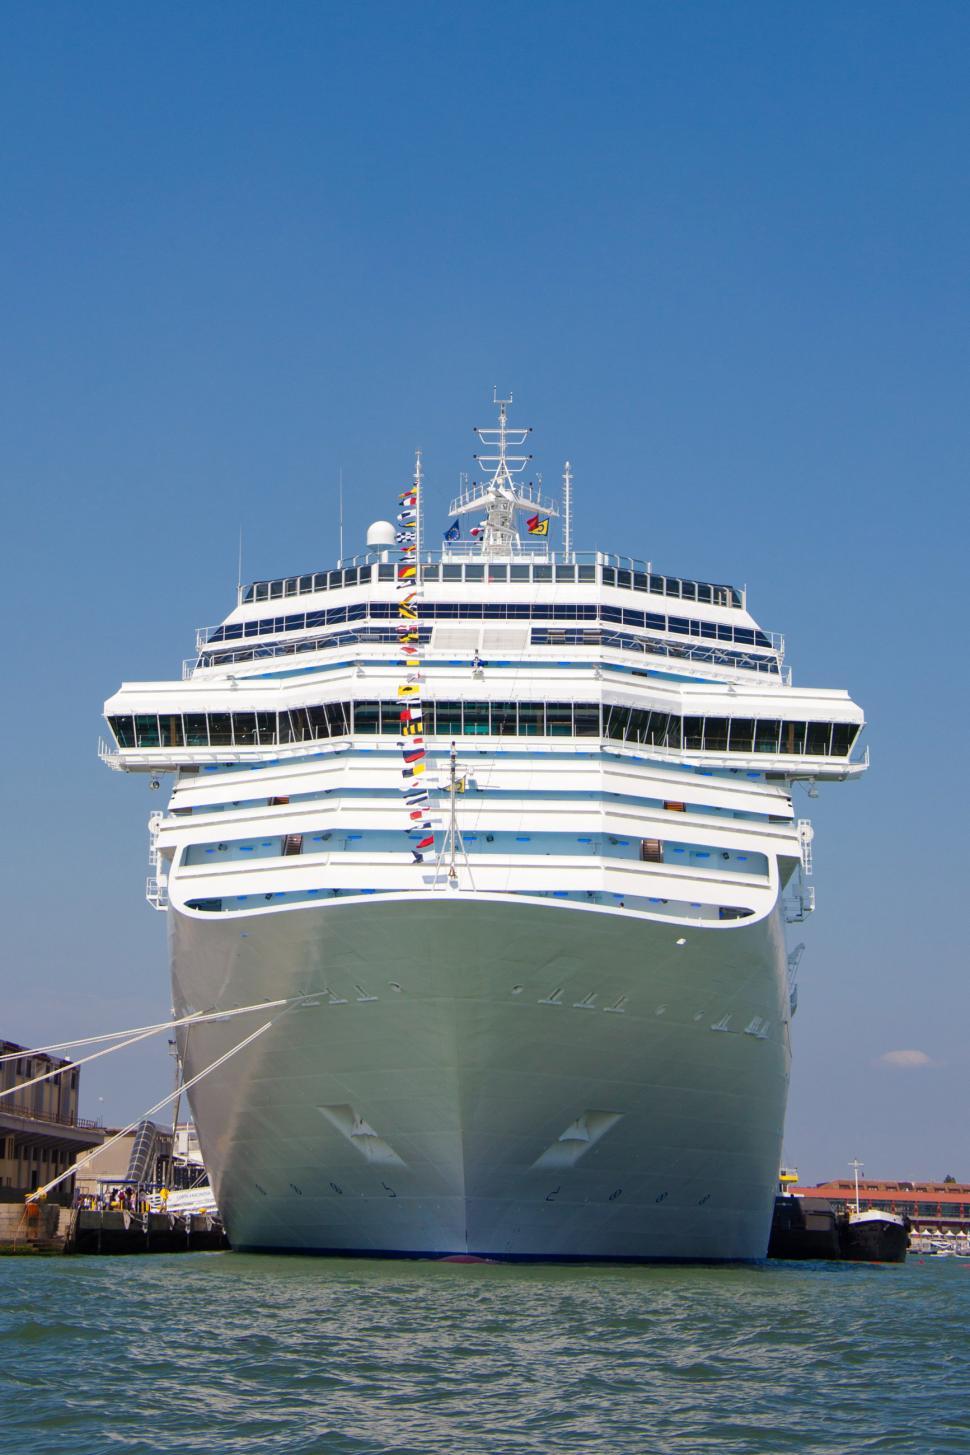 Free Image of Cruise ship in port 